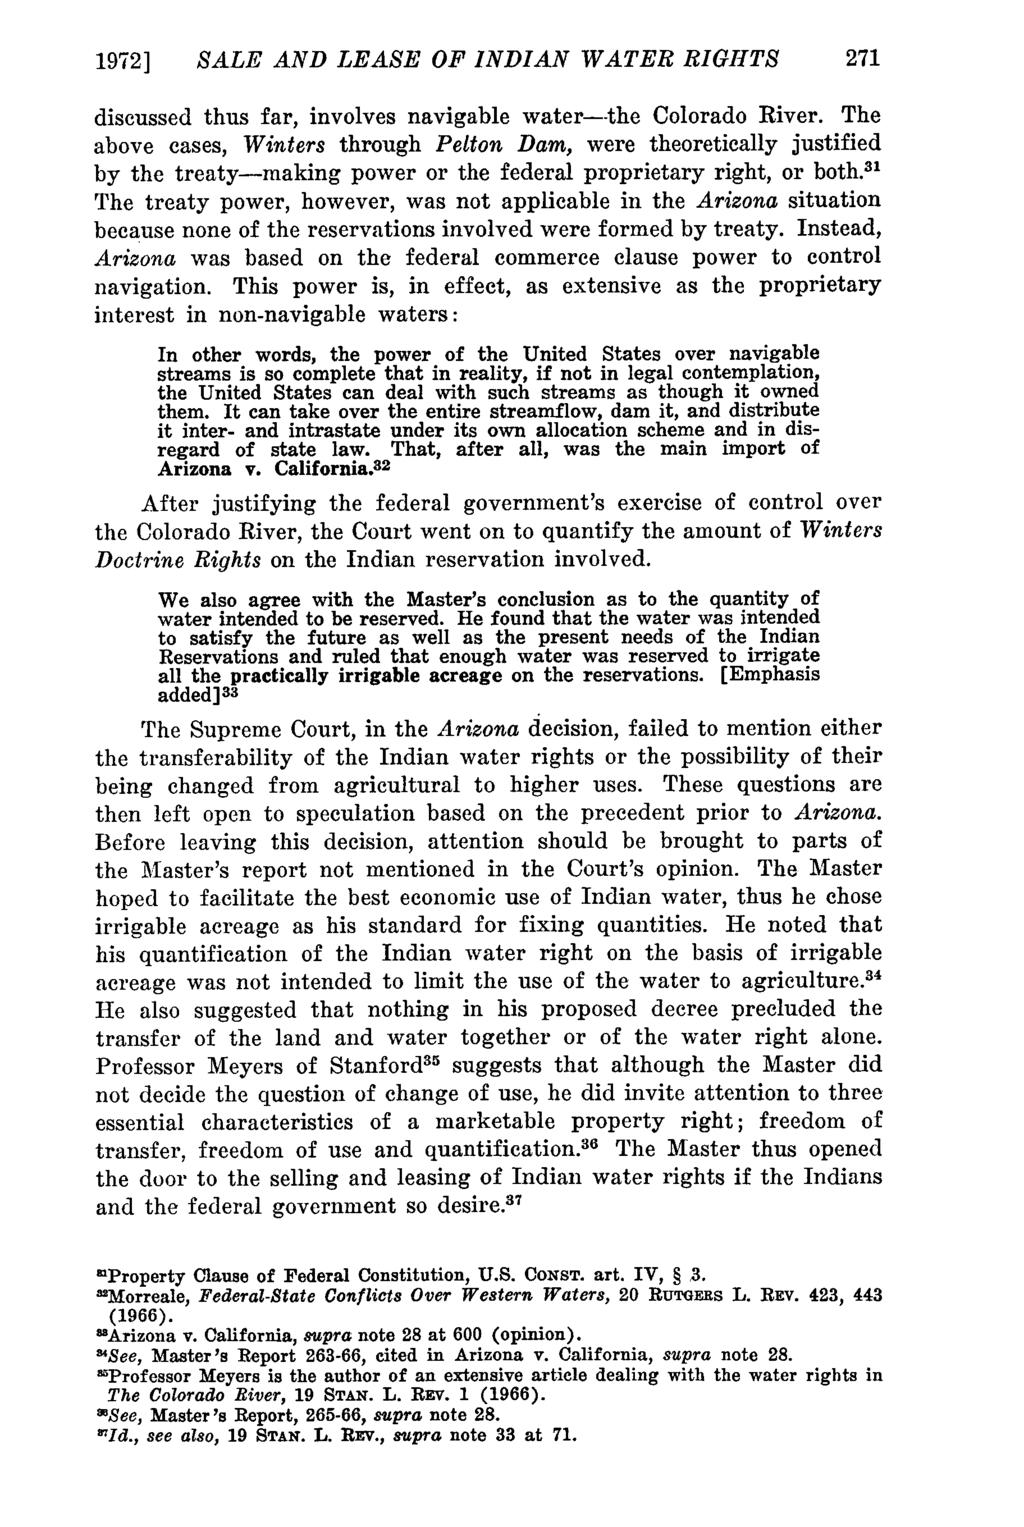 1972] SALE Montana AND LEASE Law Review, OF INDIAN Vol. 33 [1972], WATER Iss. 2, RIGHTS Art. 5 271 discussed thus far, involves navigable water--the Colorado River.